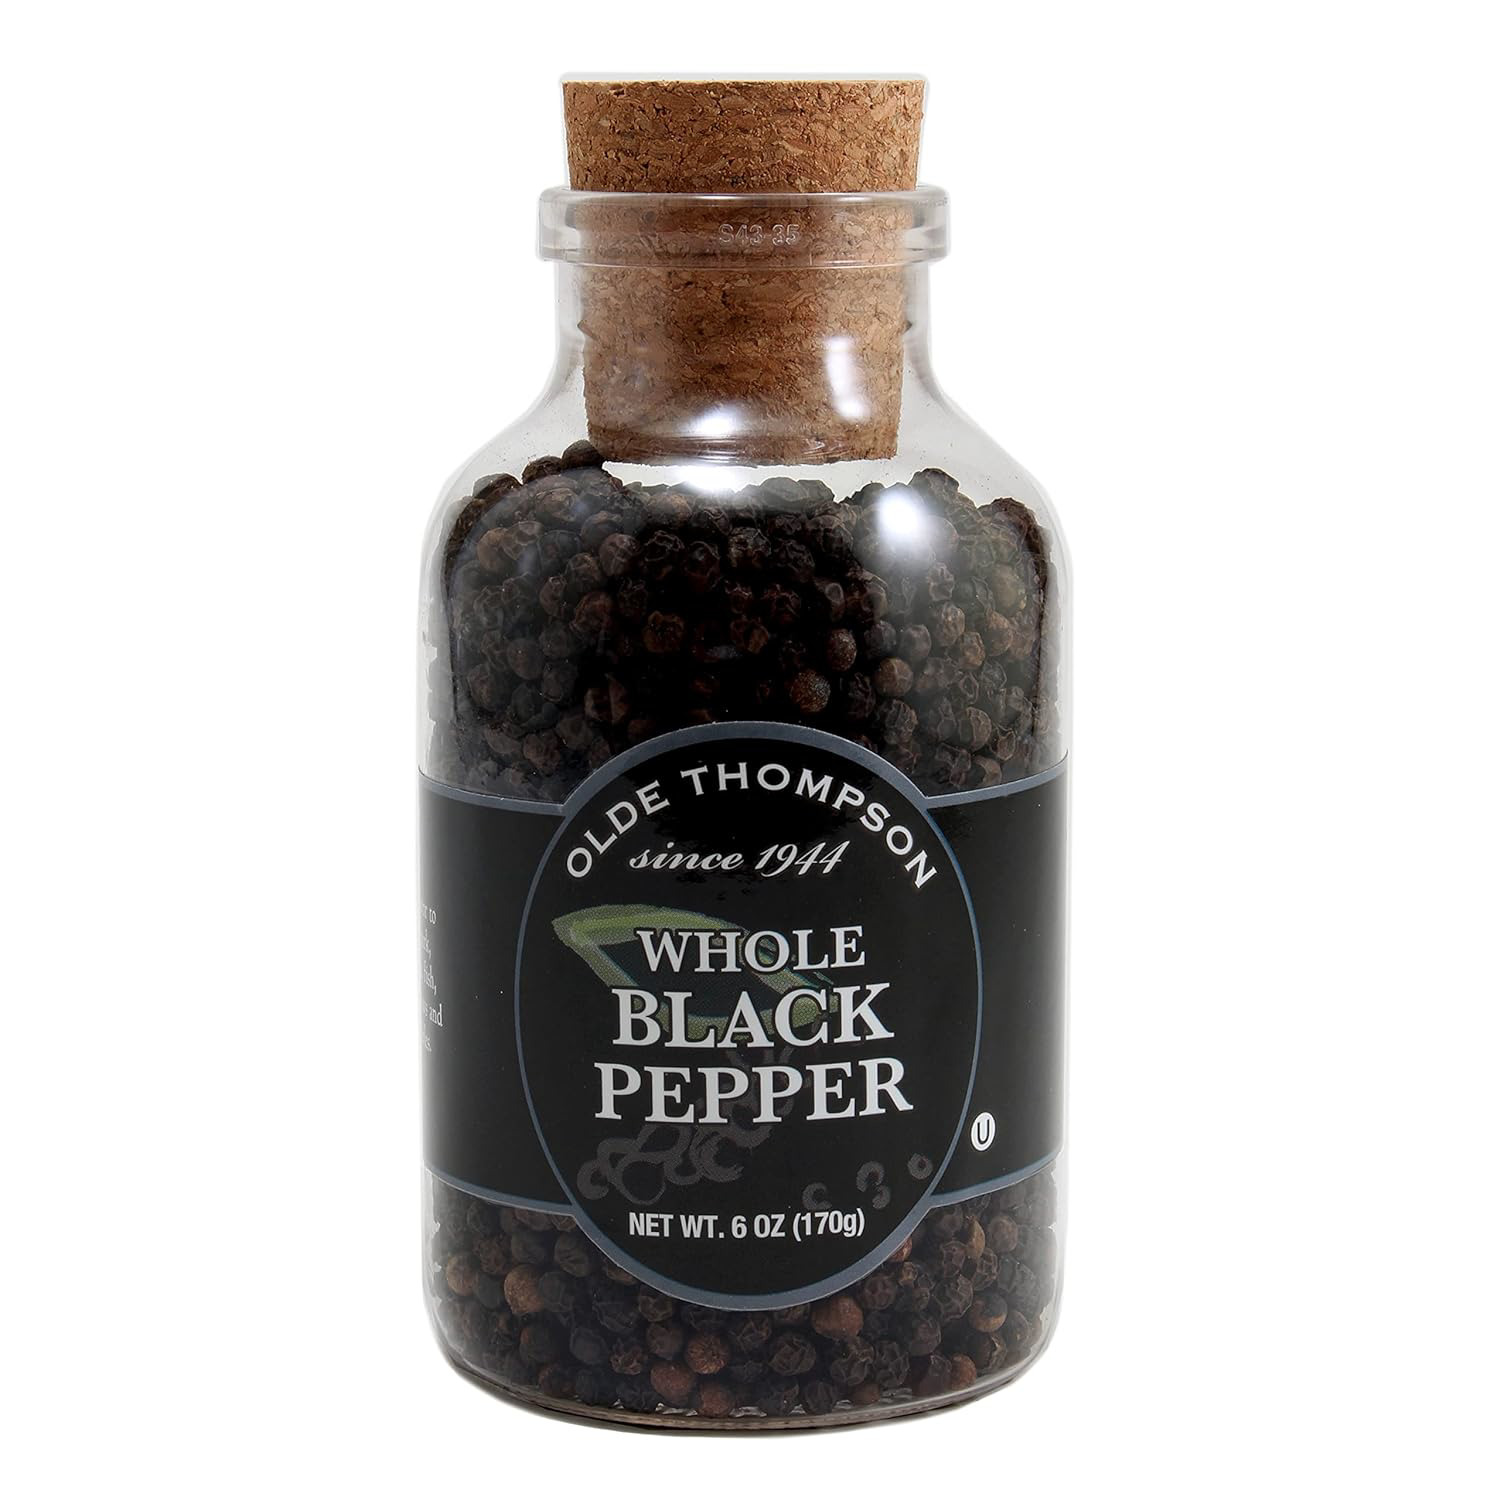 Olde Thompson Whole Black Peppercorns - Plastic Bottle with Cork Stopper Top 6 o